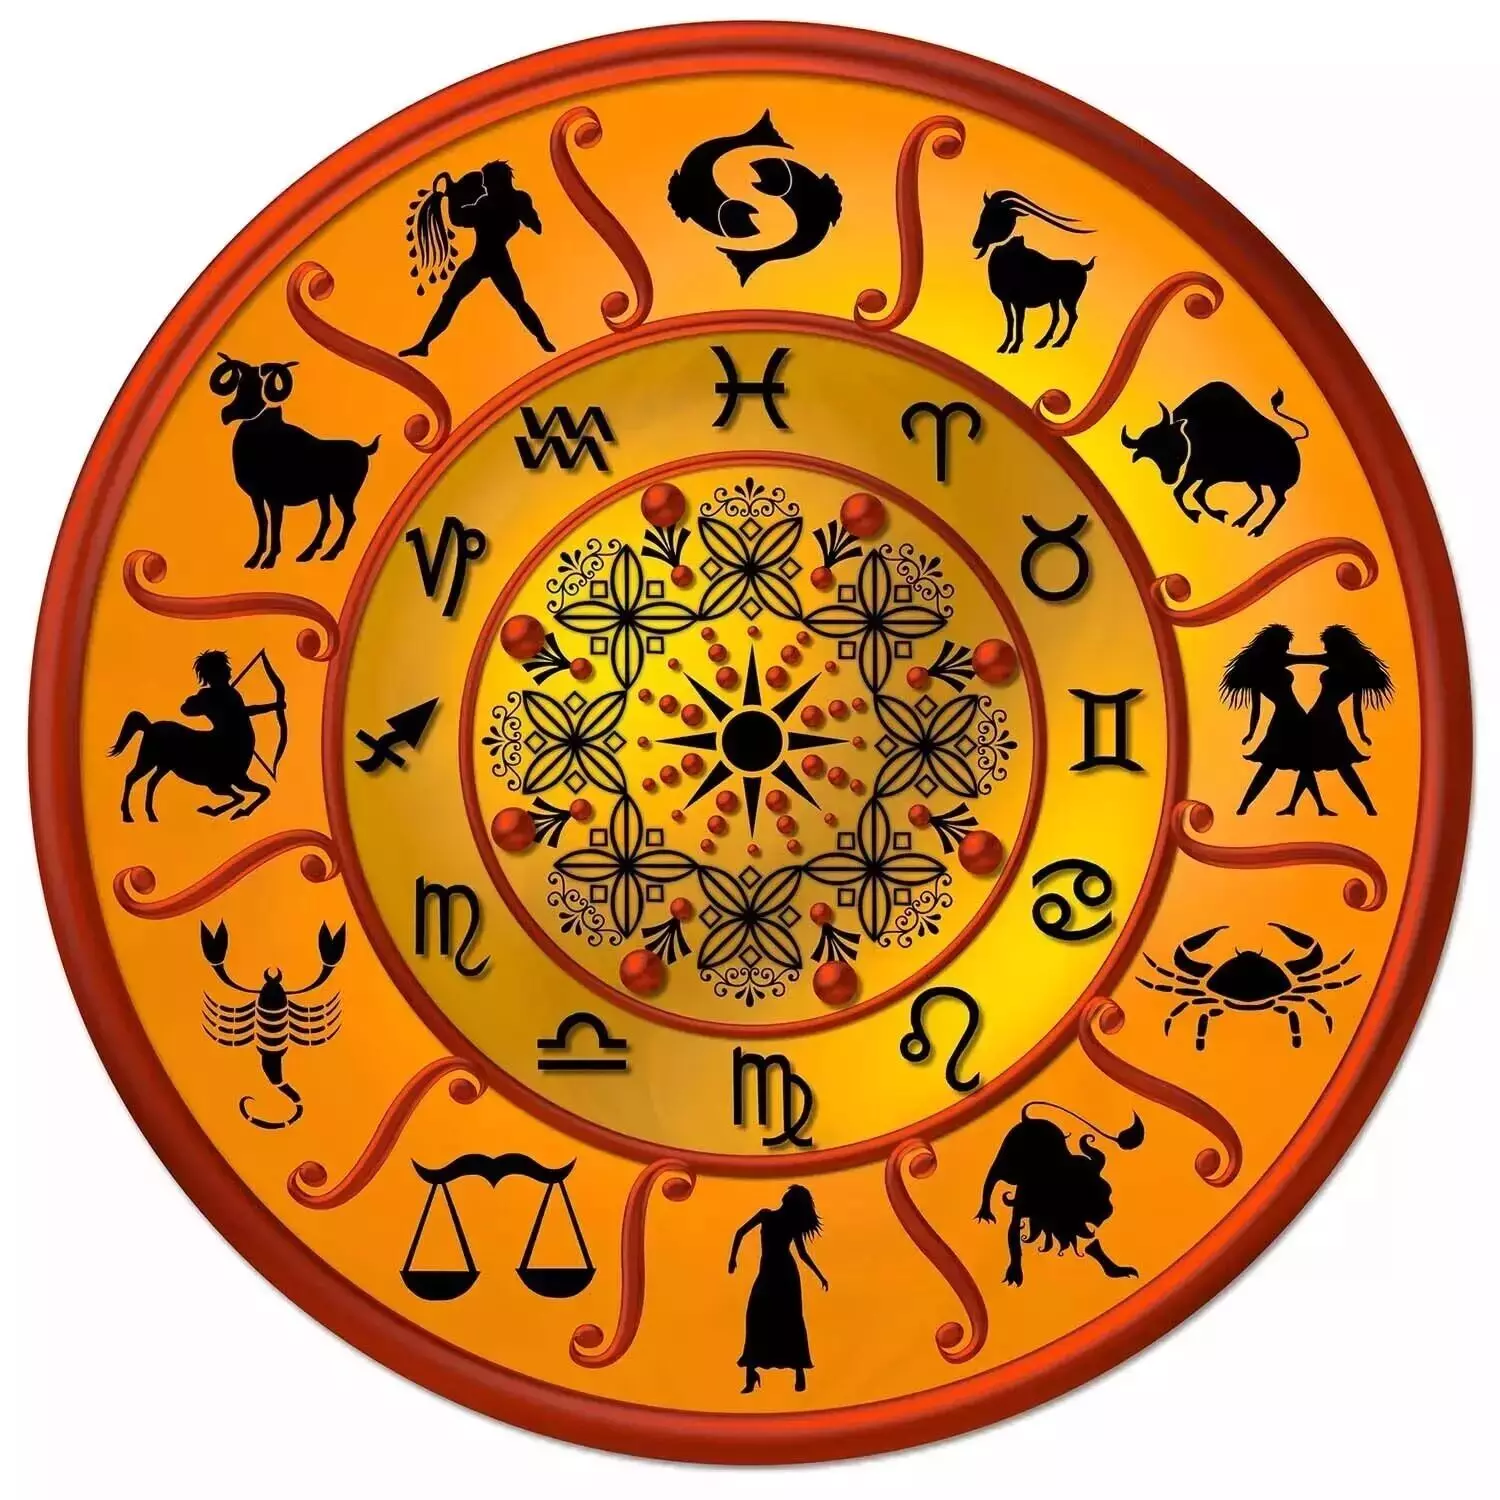 29 August  – Know your todays horoscope